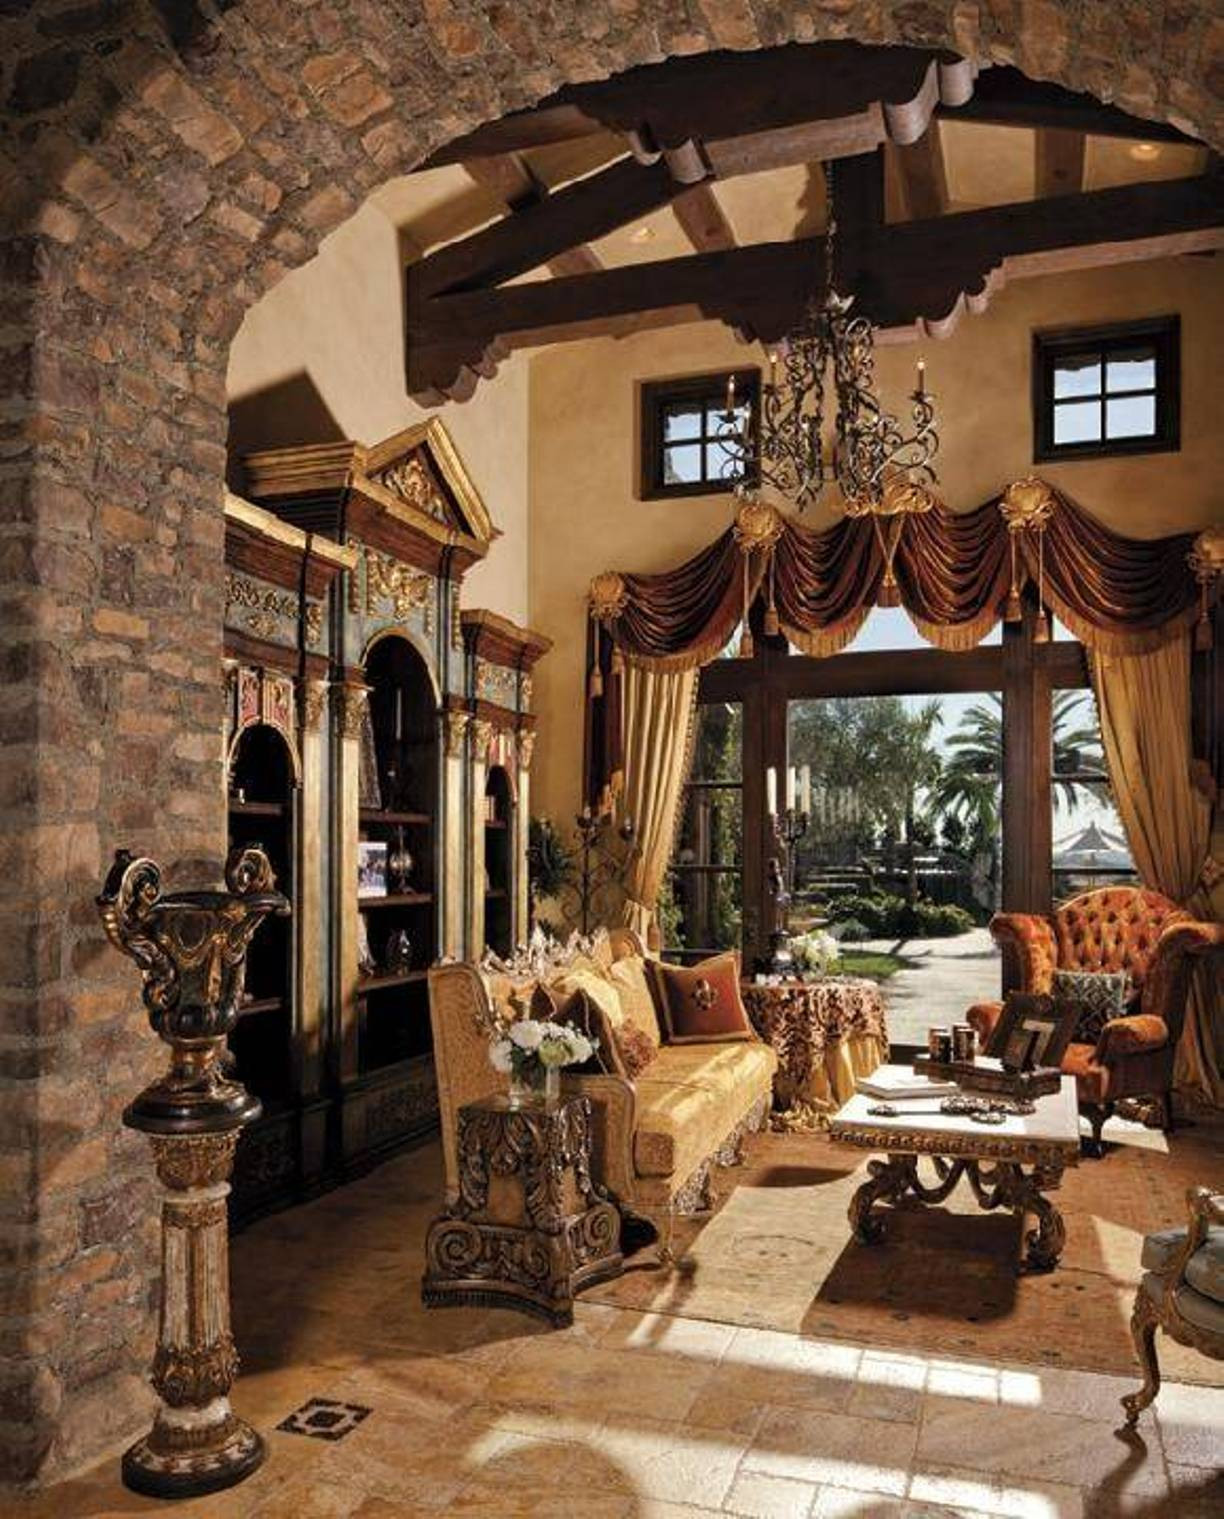 Tuscan Living Room Ideas
 15 Awesome Tuscan Living Room Ideas